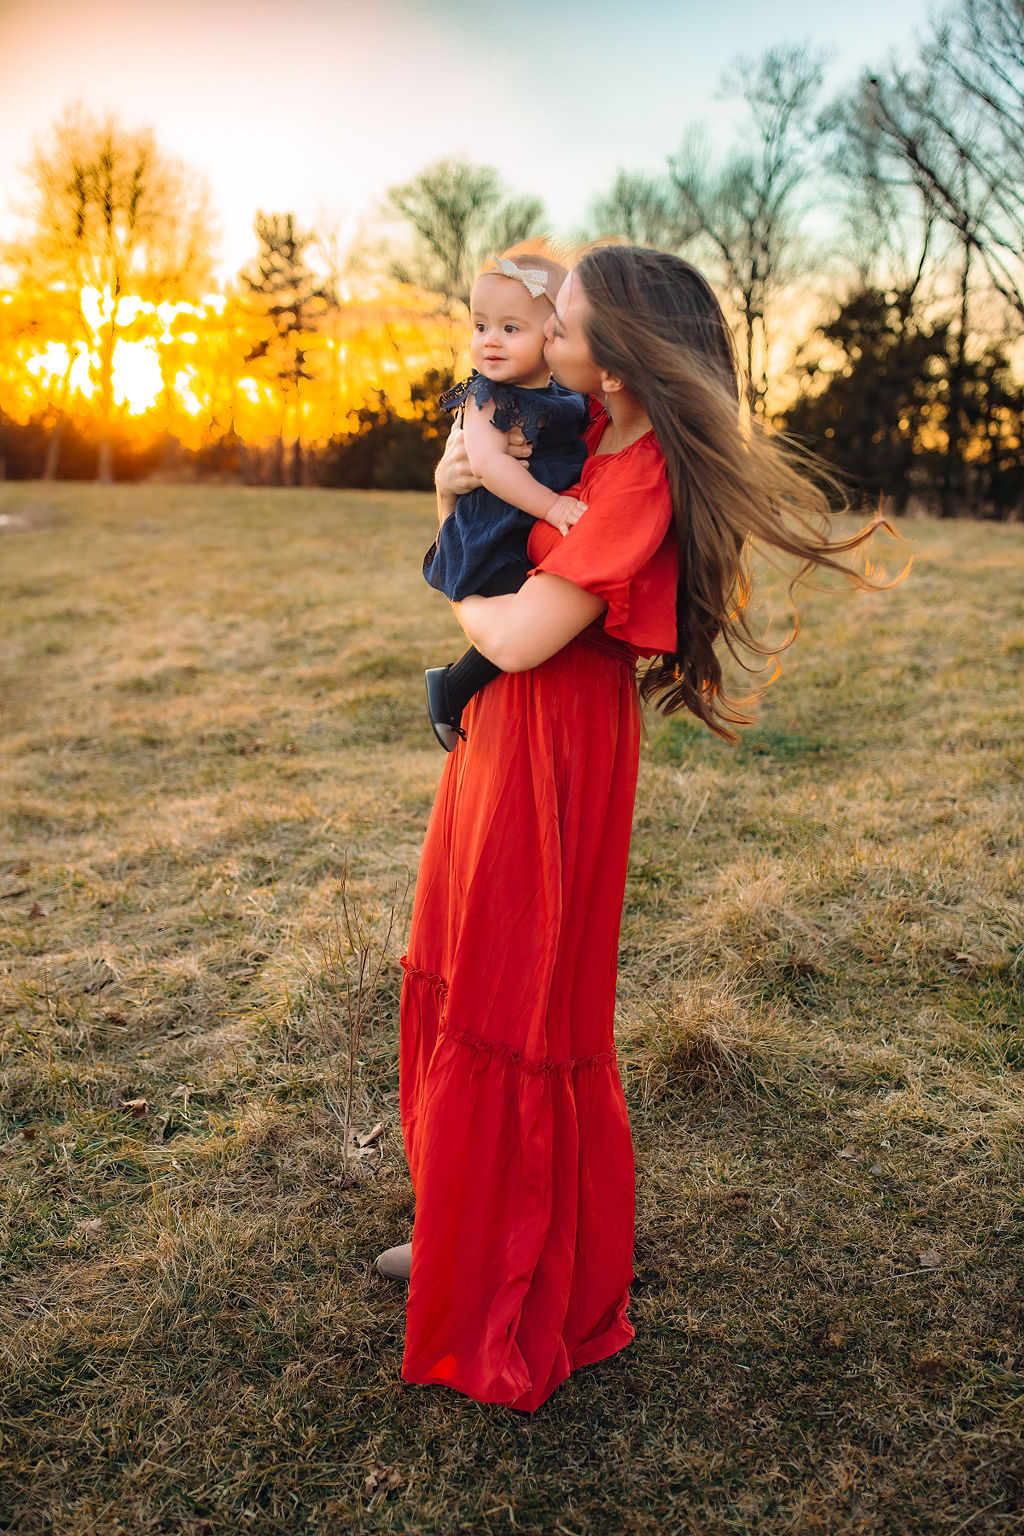 mom in red dress holds toddler in a field with a blue dress and bow EMU Musikgarten